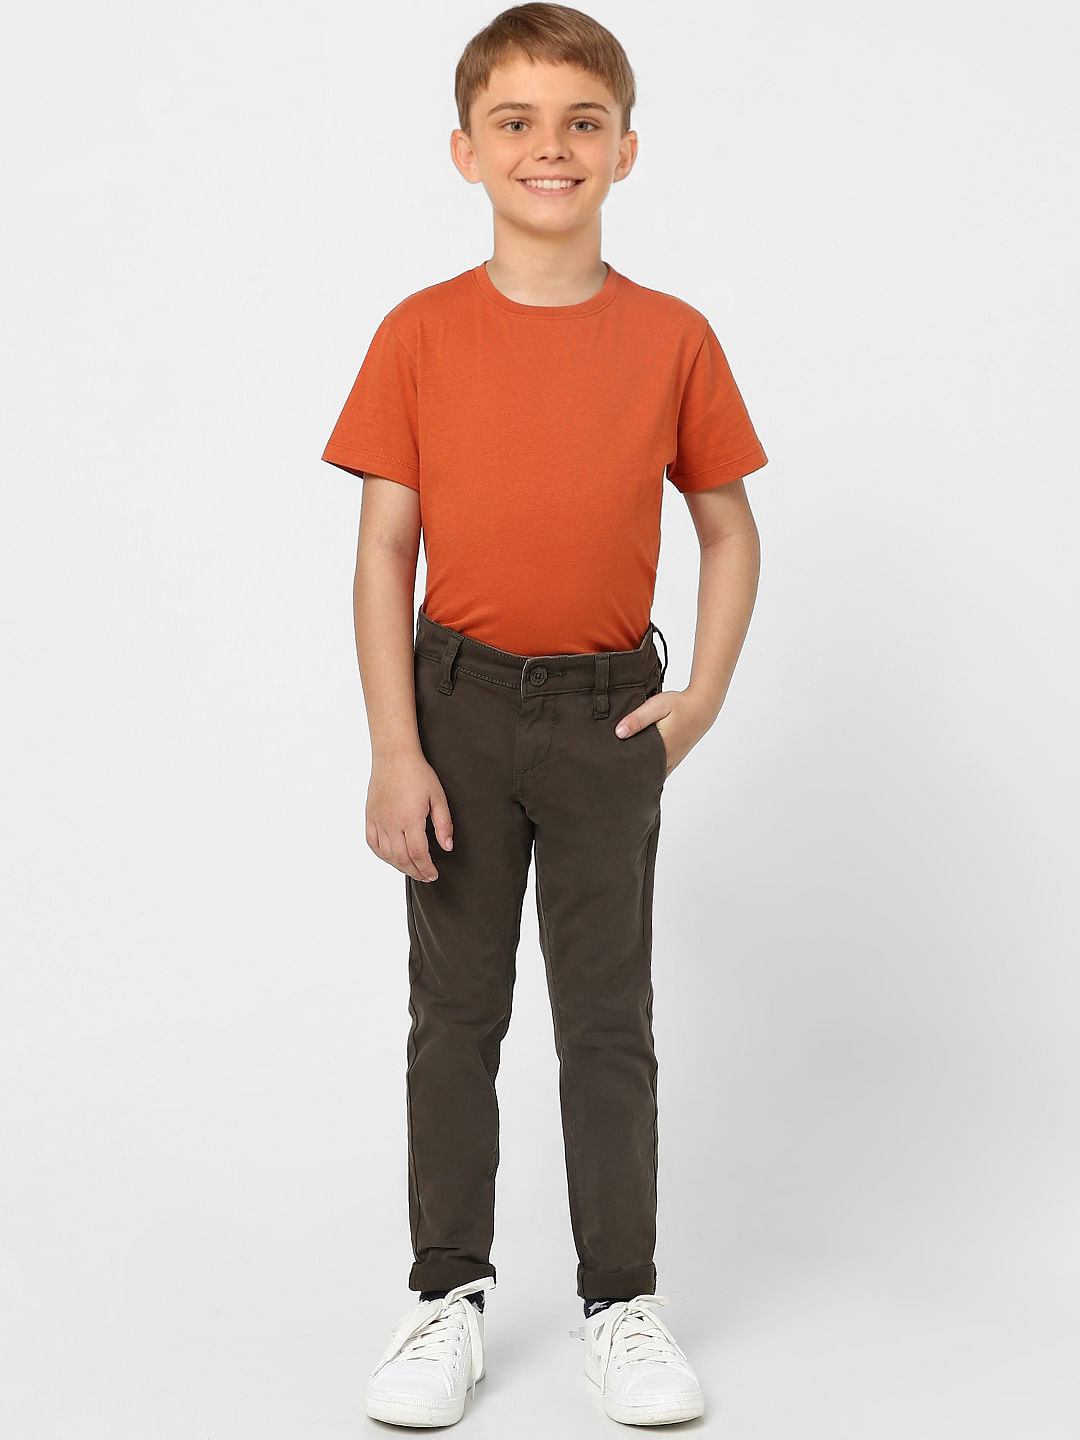 Slim fit chino pants brown - BOYS 2-10 YEARS Bottoms & Jeans | Ackermans